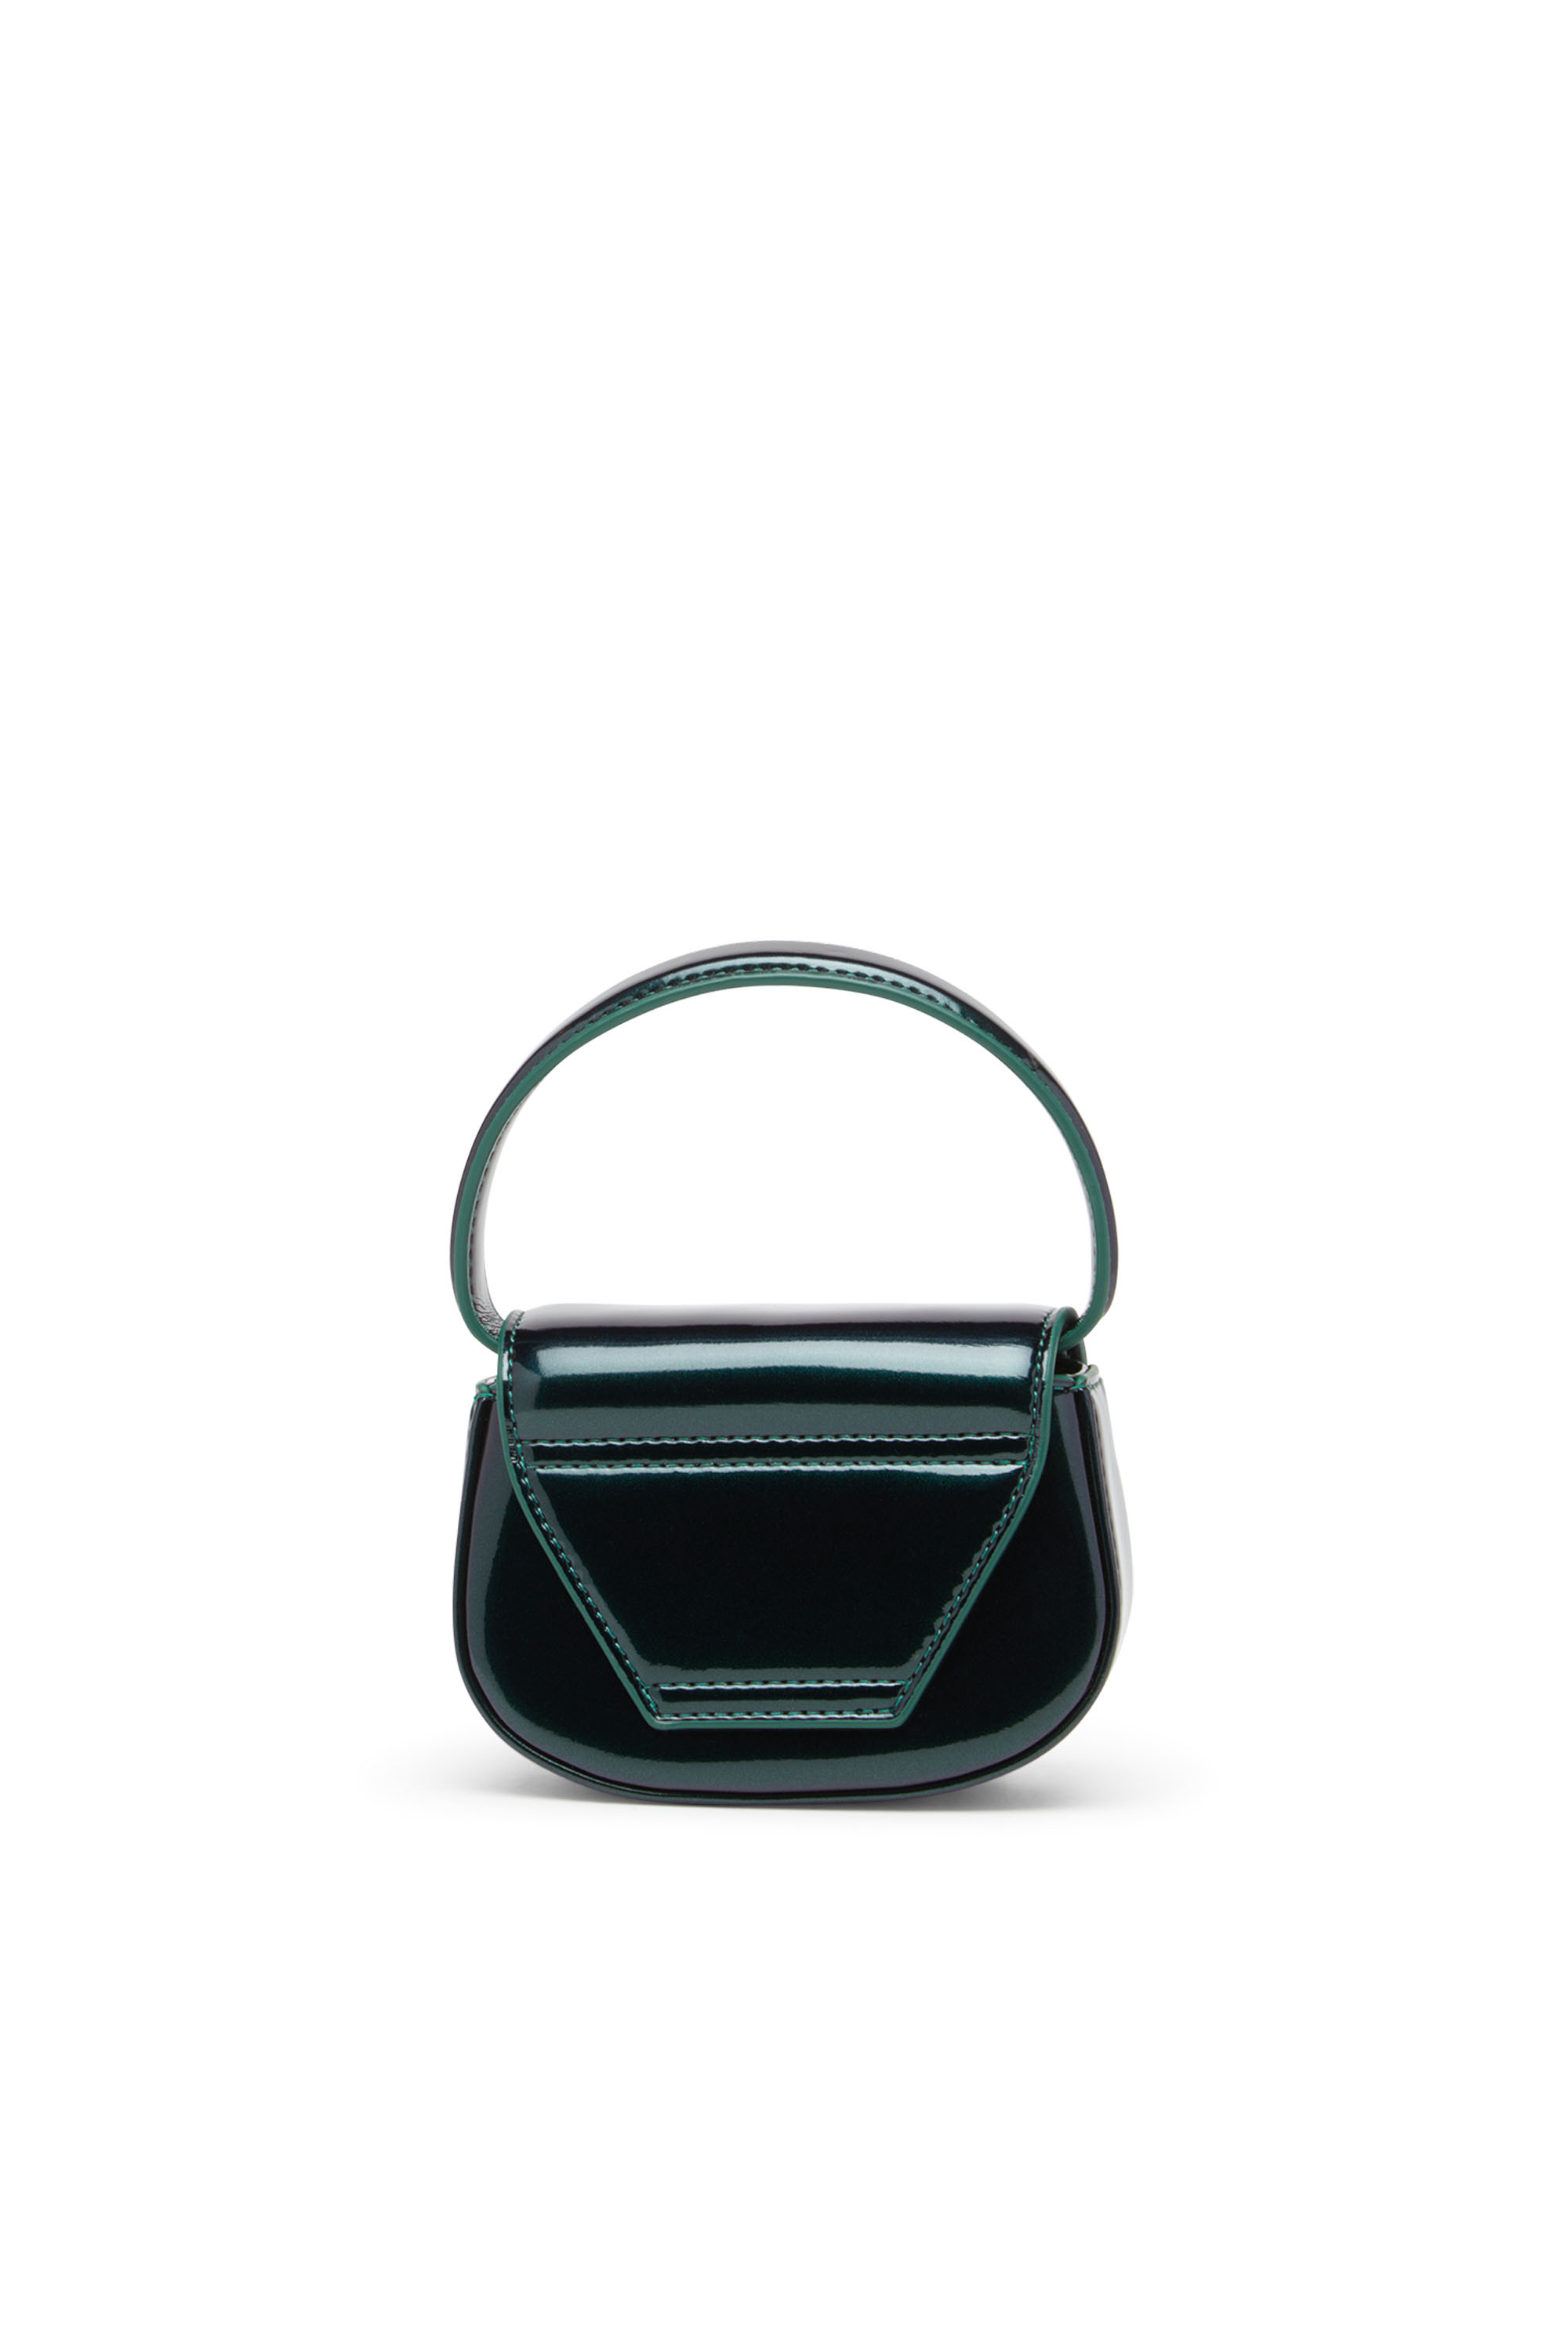 Diesel - 1DR XS, Woman 1DR XS-Iconic iridescent mini bag in Multicolor - Image 2